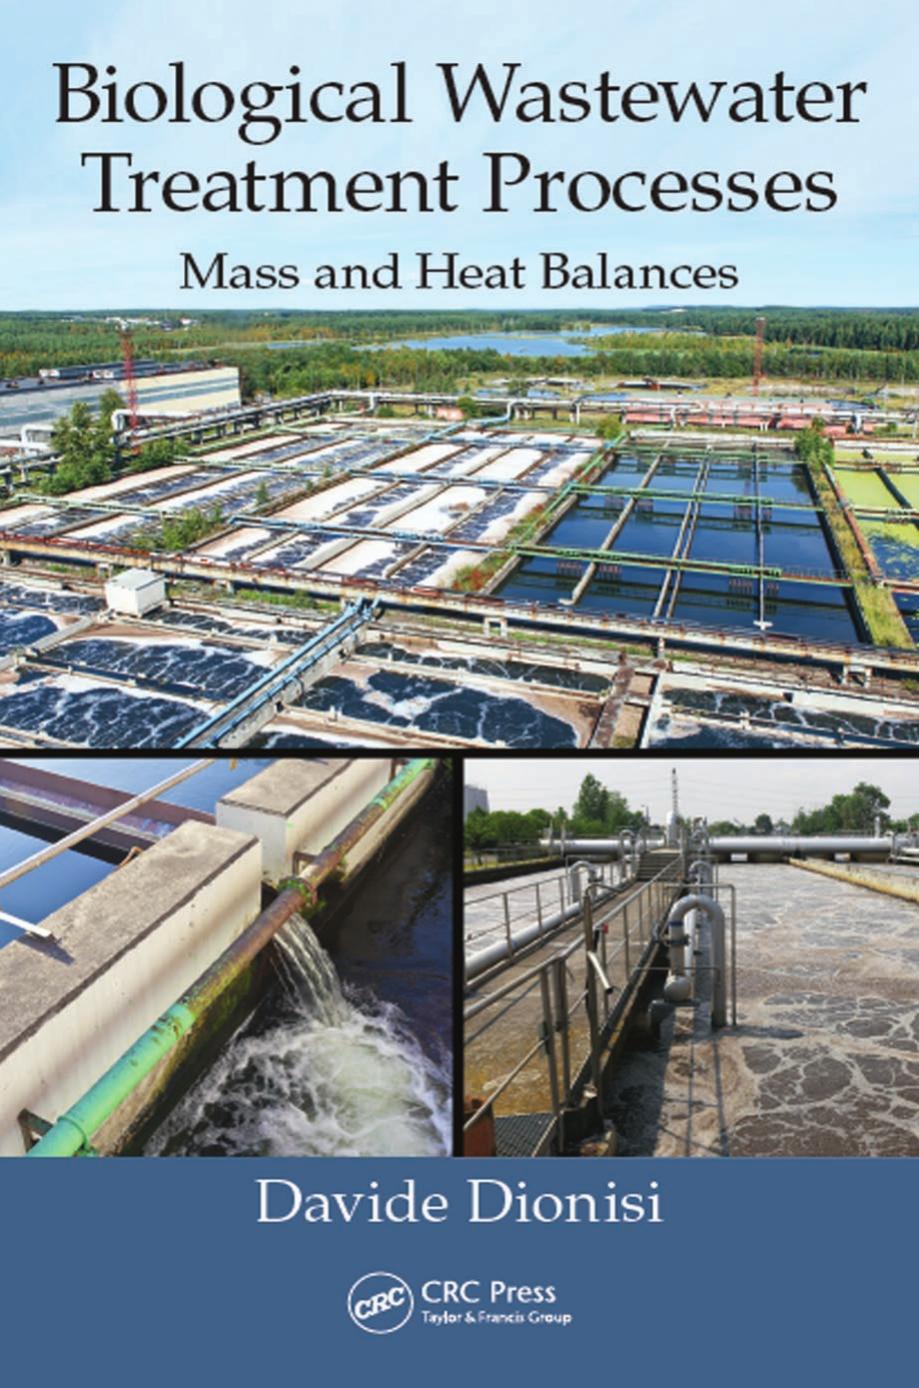 Biological Wastewater Treatment Processes: Mass and Heat Balances